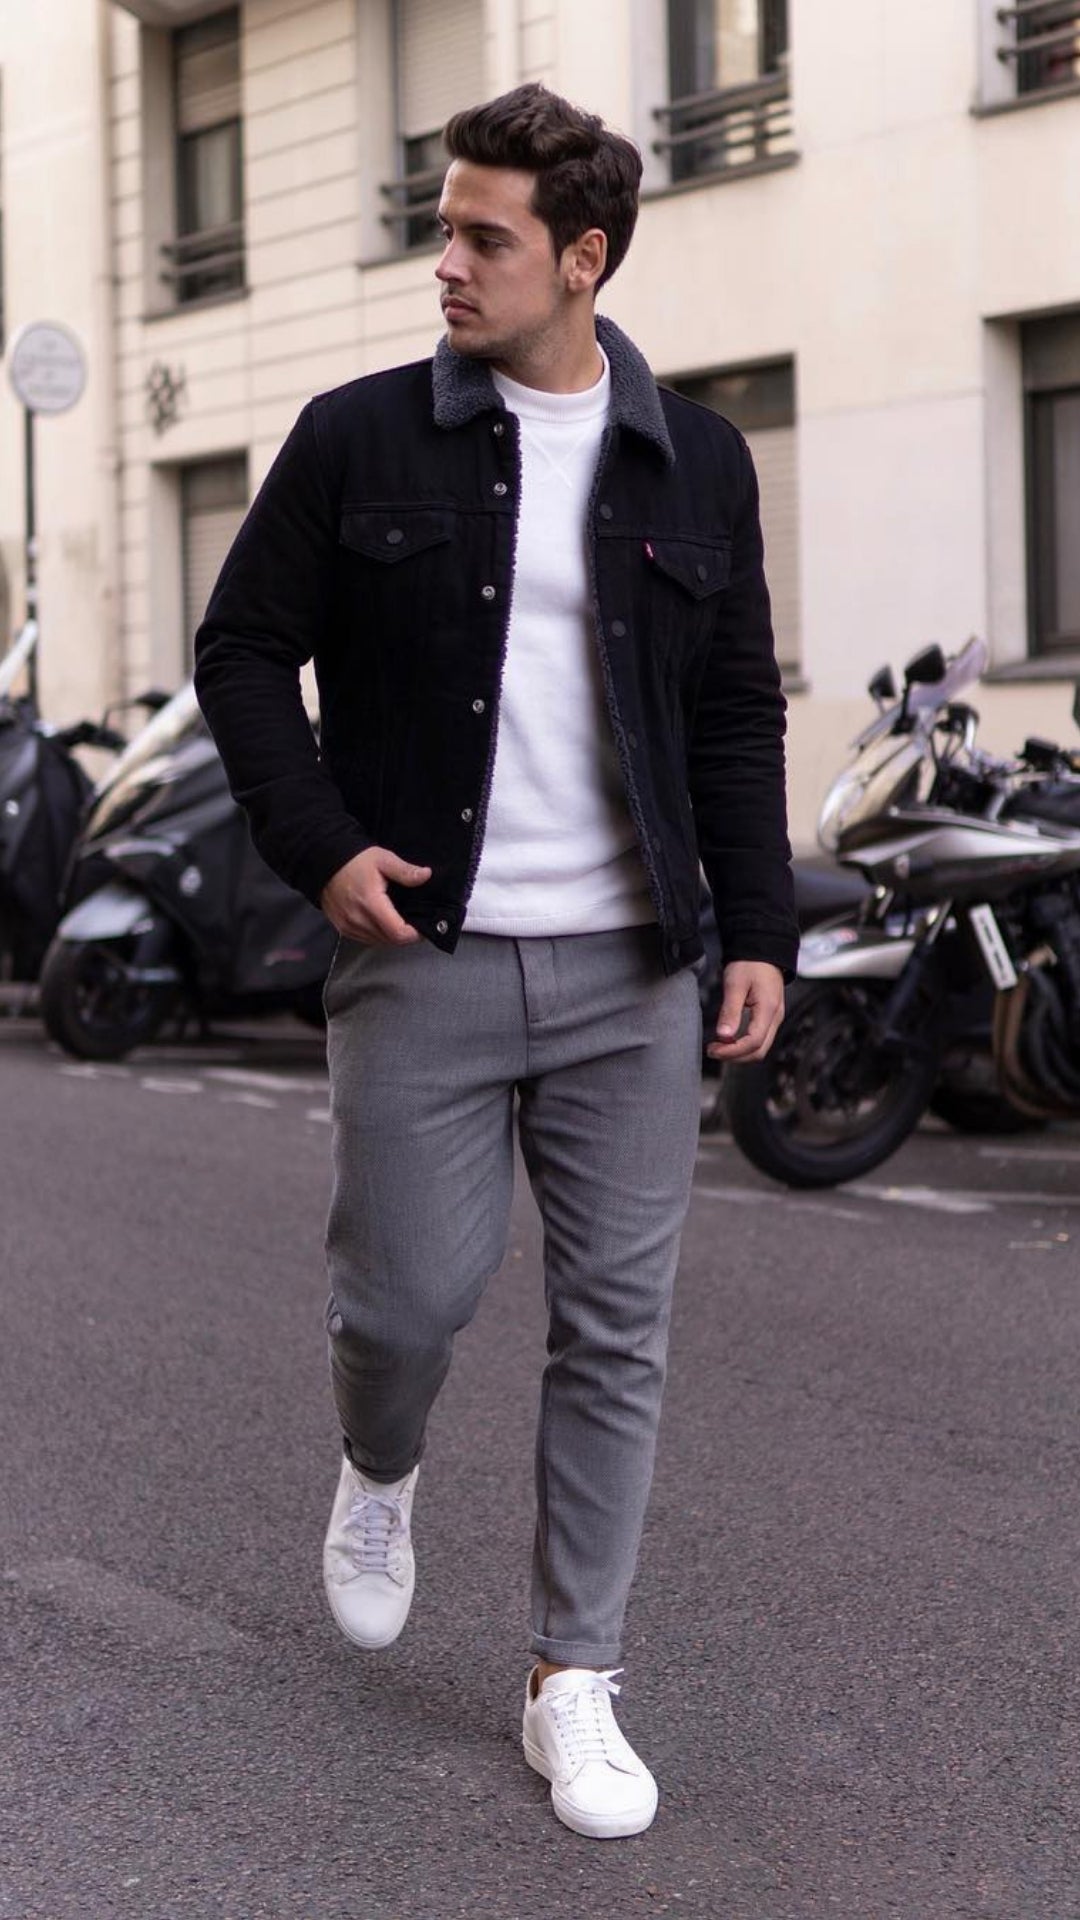 Monochrome Dressing Style For Men - 5 Outfits To Try #monochrome #outfits #mensfashion #streetstyle